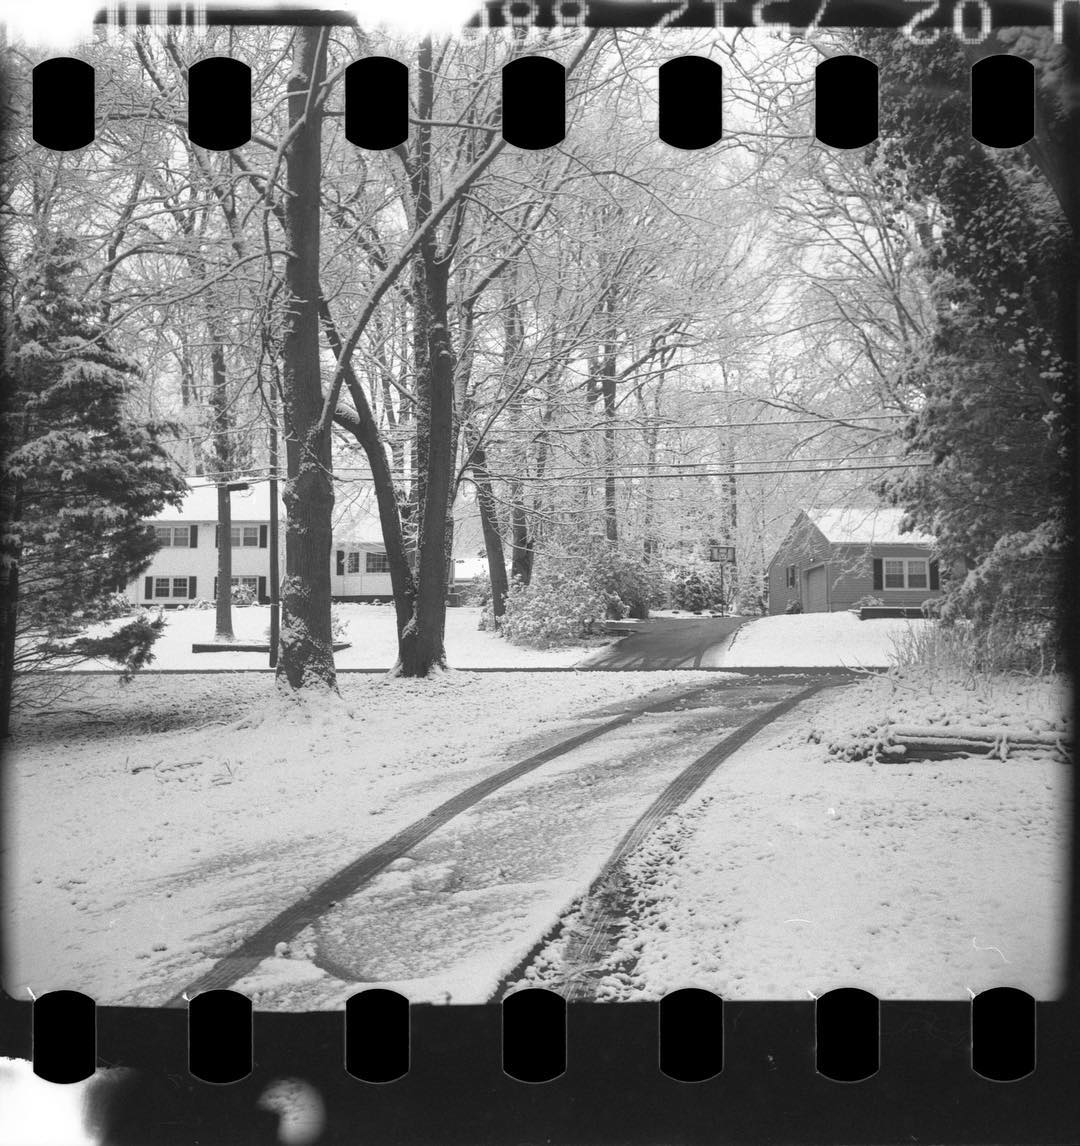 Snowy morning. More Kodak Instamatic 500 loaded with 35mm ORWO UN54 goodness. #film #filmphotography #filmphotographic #instamatic